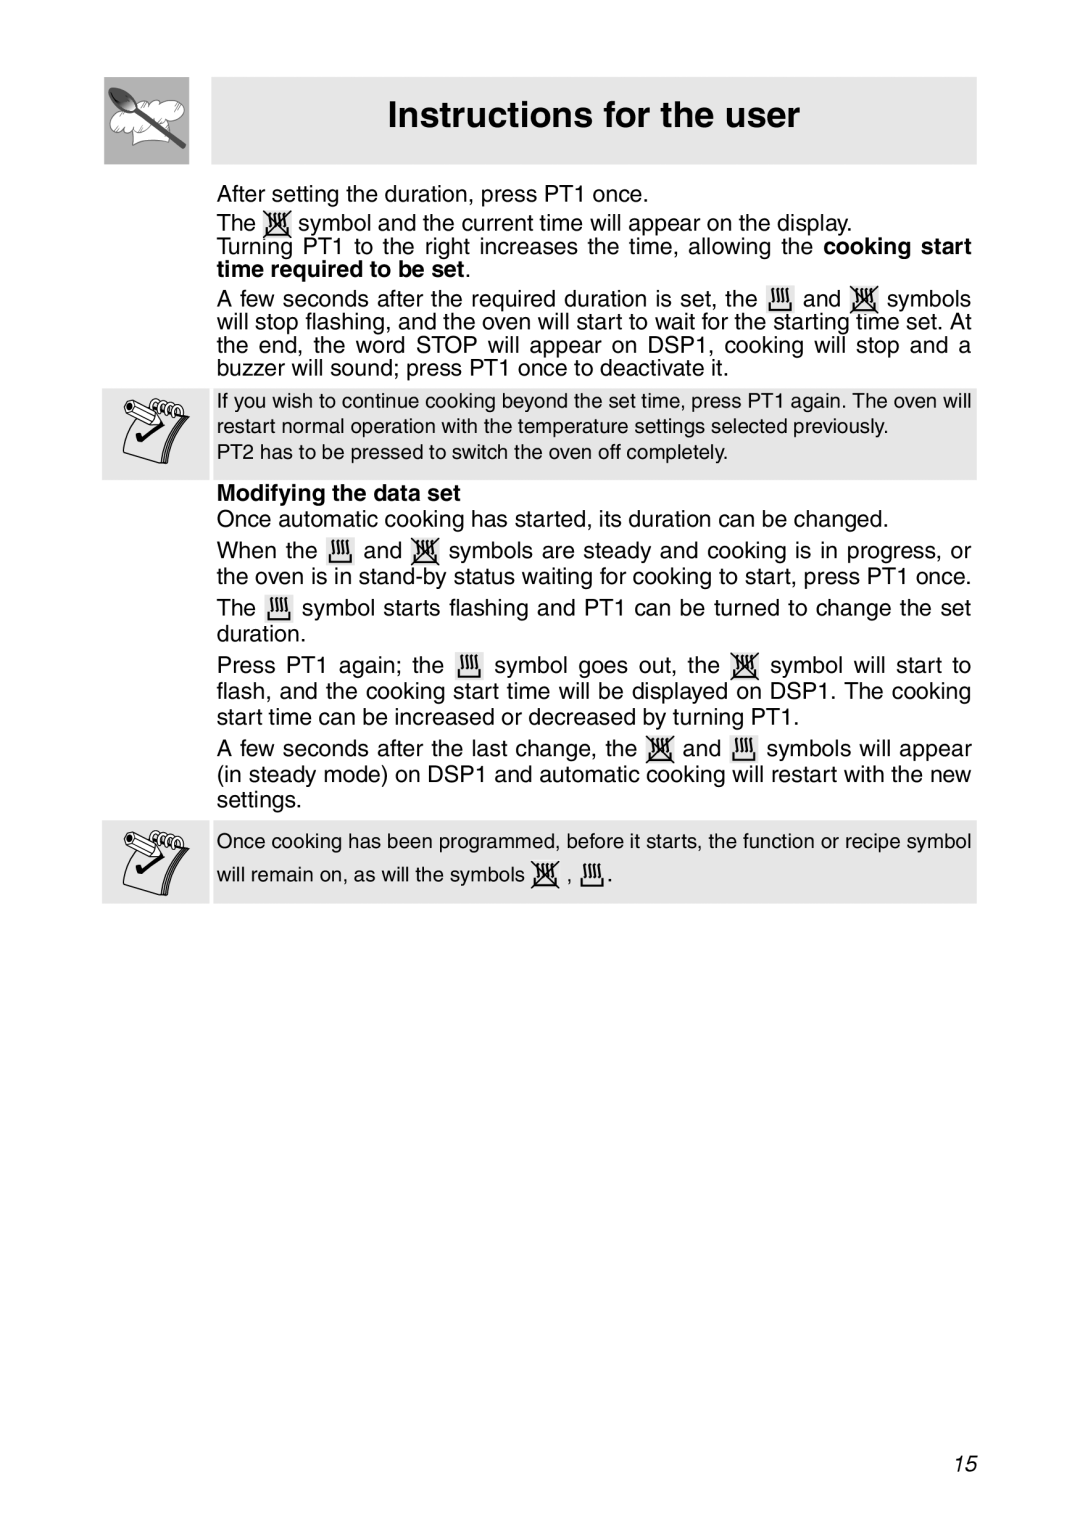 Smeg SC112 manual Instructions for the user, After setting the duration, press PT1 once, Modifying the data set 